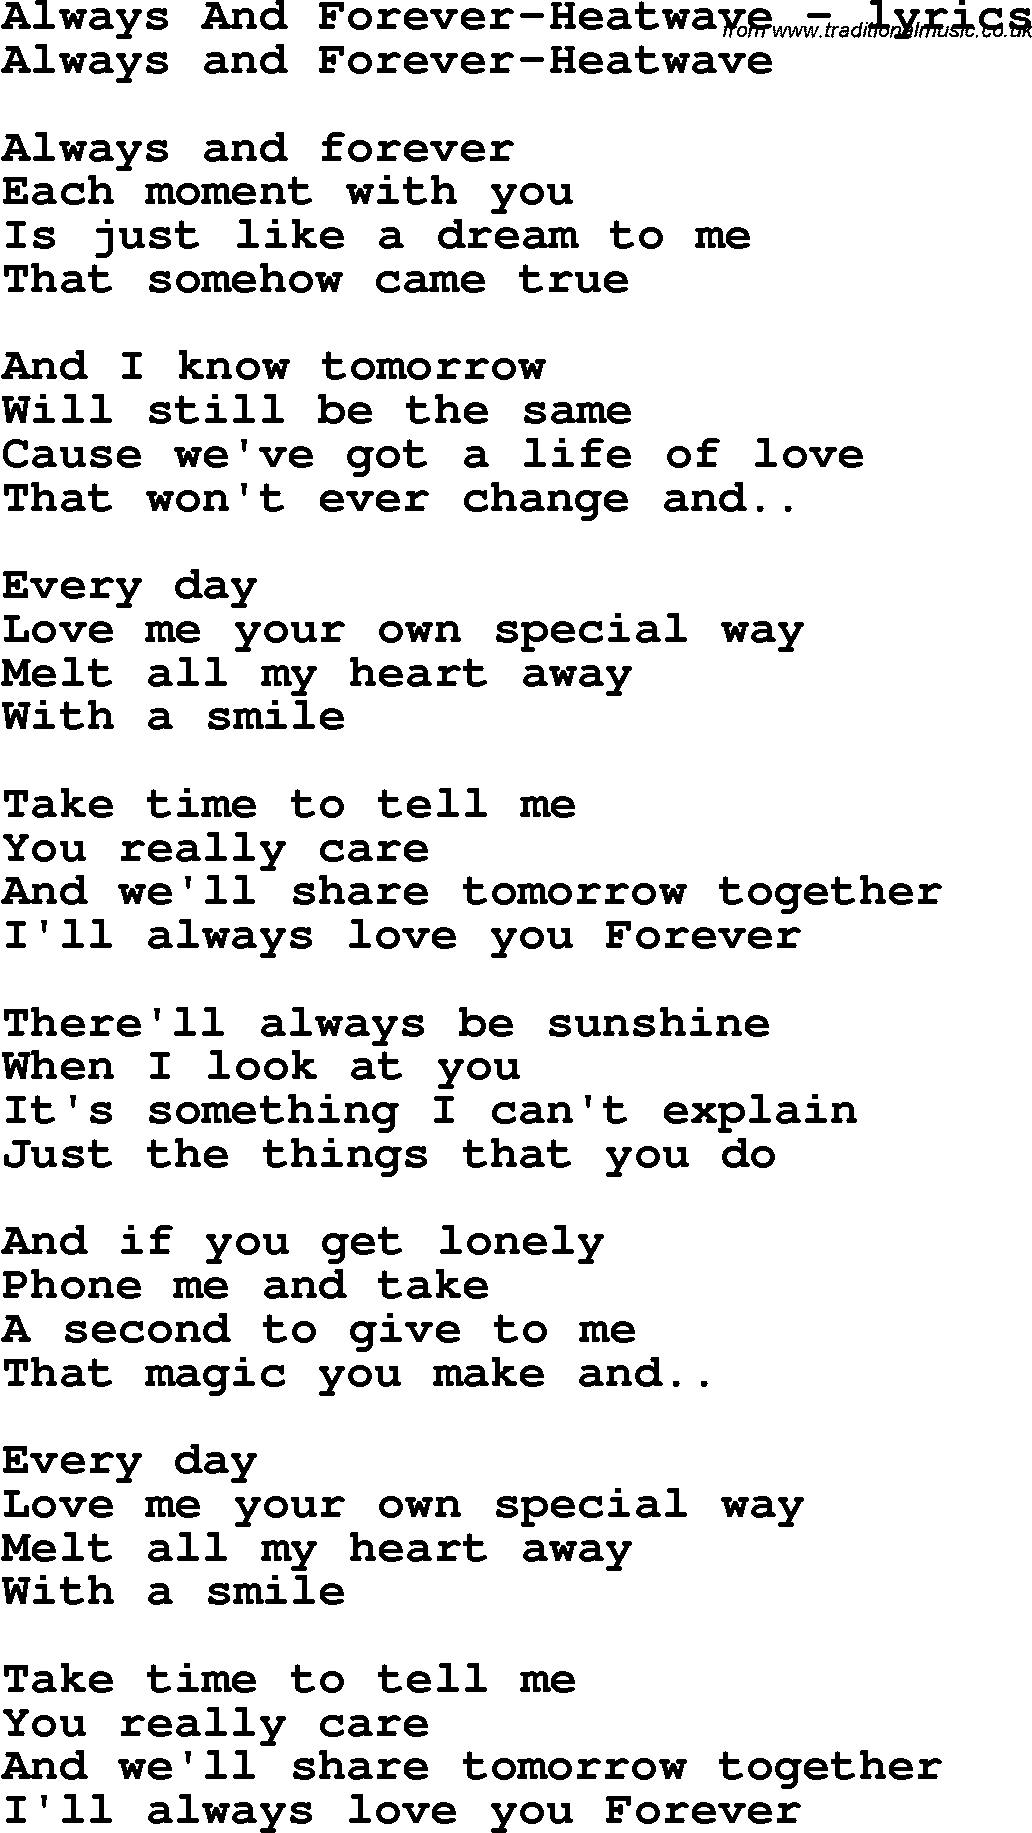 Love Song Lyrics for: Always And Forever-Heatwave